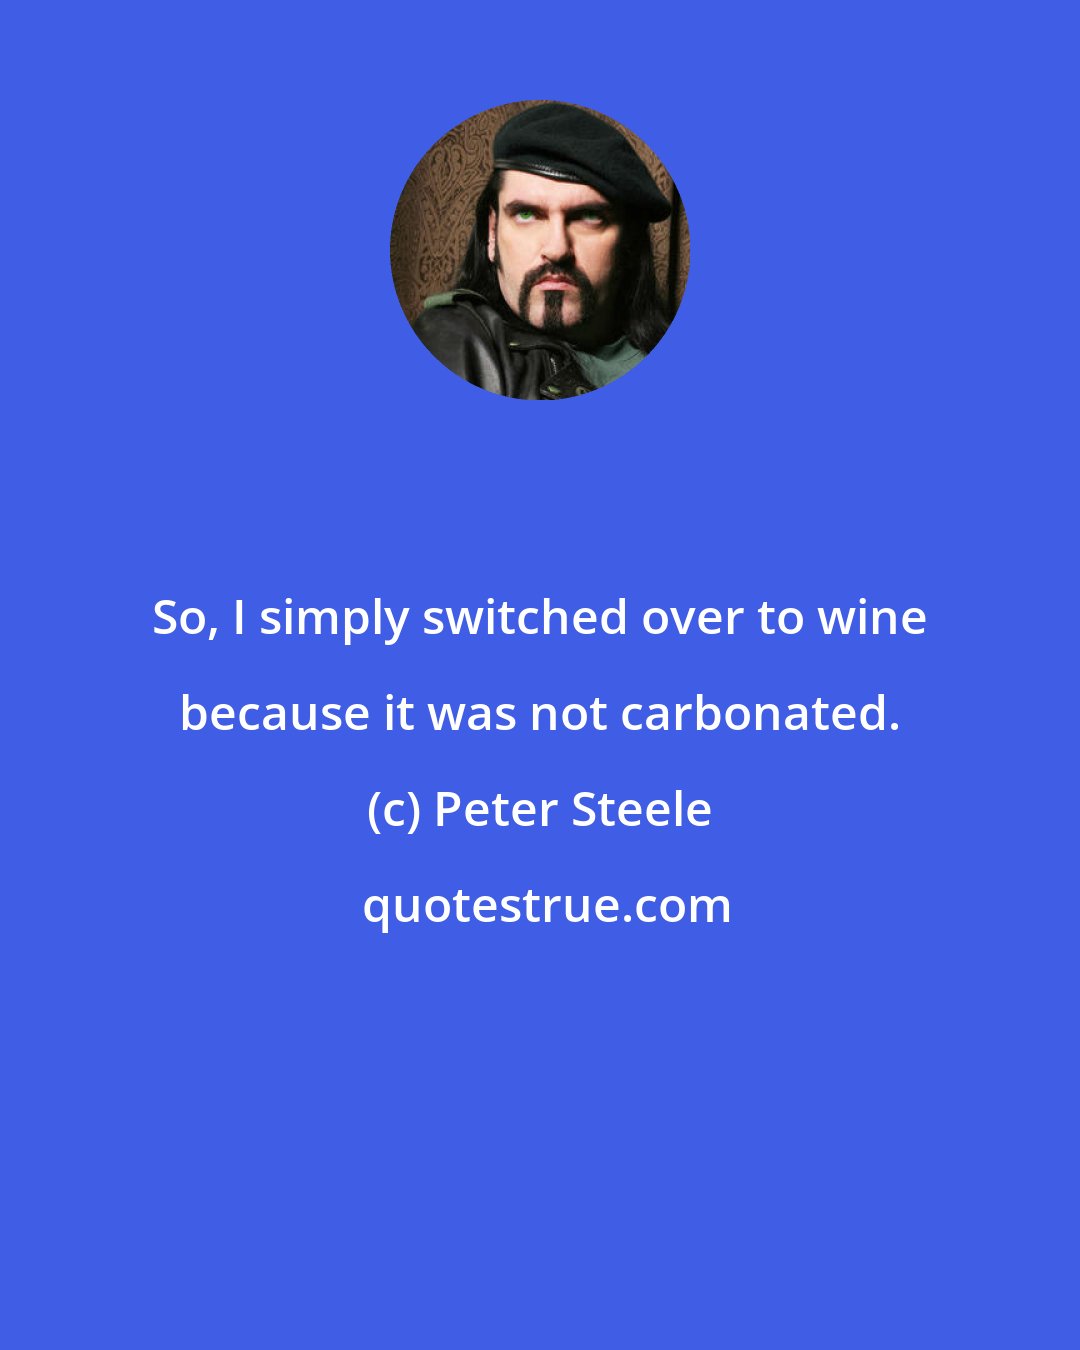 Peter Steele: So, I simply switched over to wine because it was not carbonated.